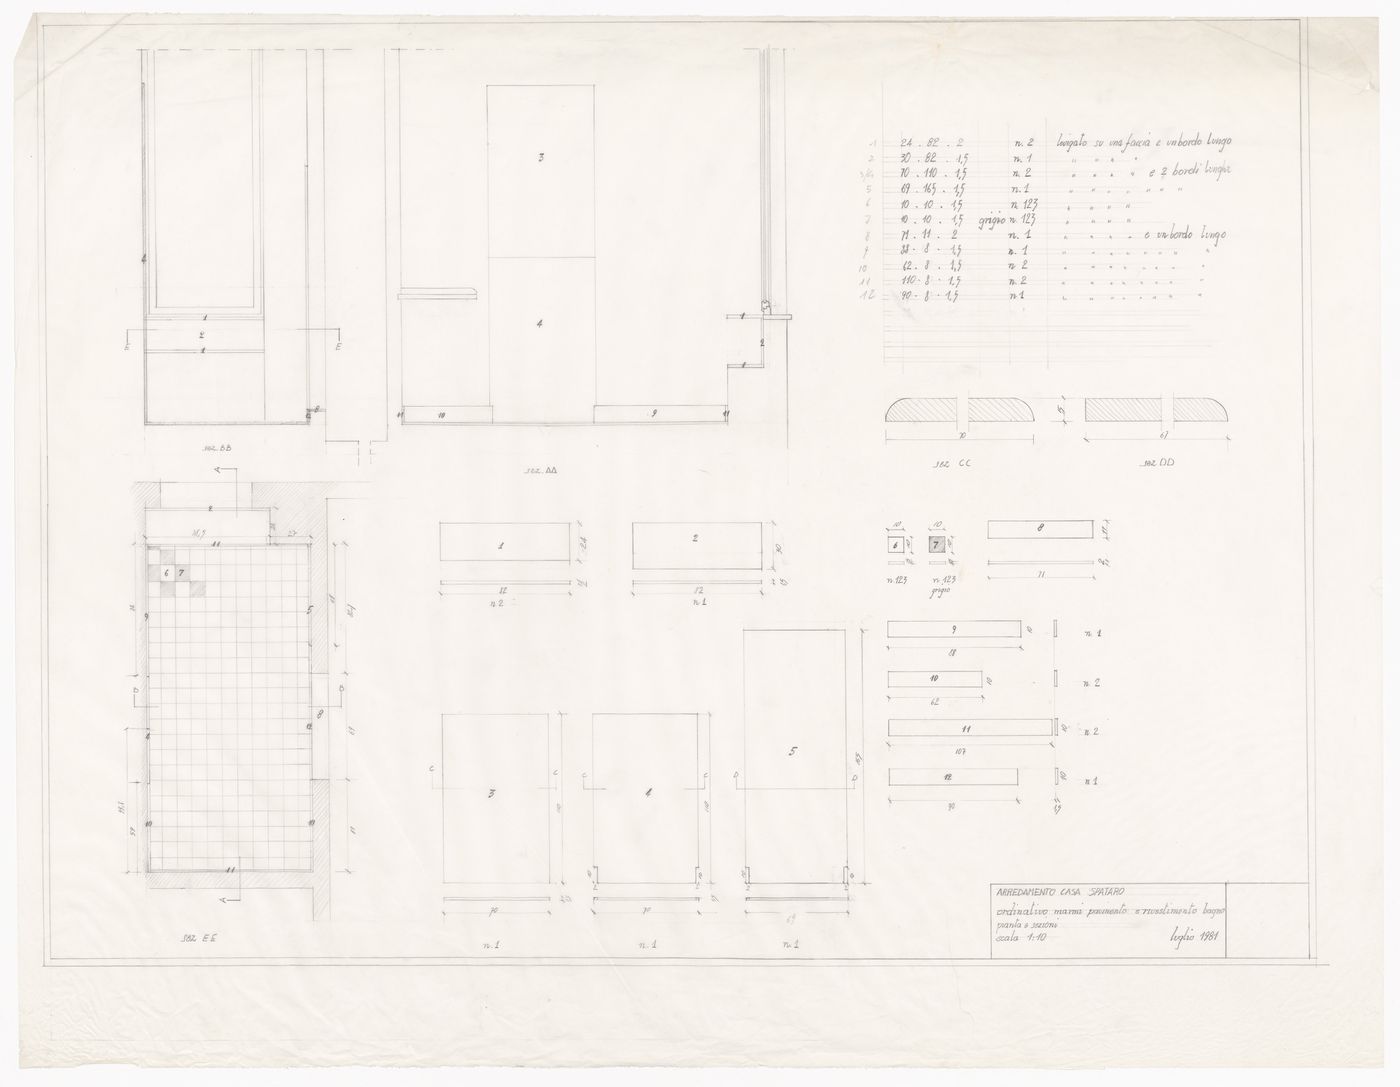 Bathroom floor plans and sections for Casa Spataro, Milan, Italy